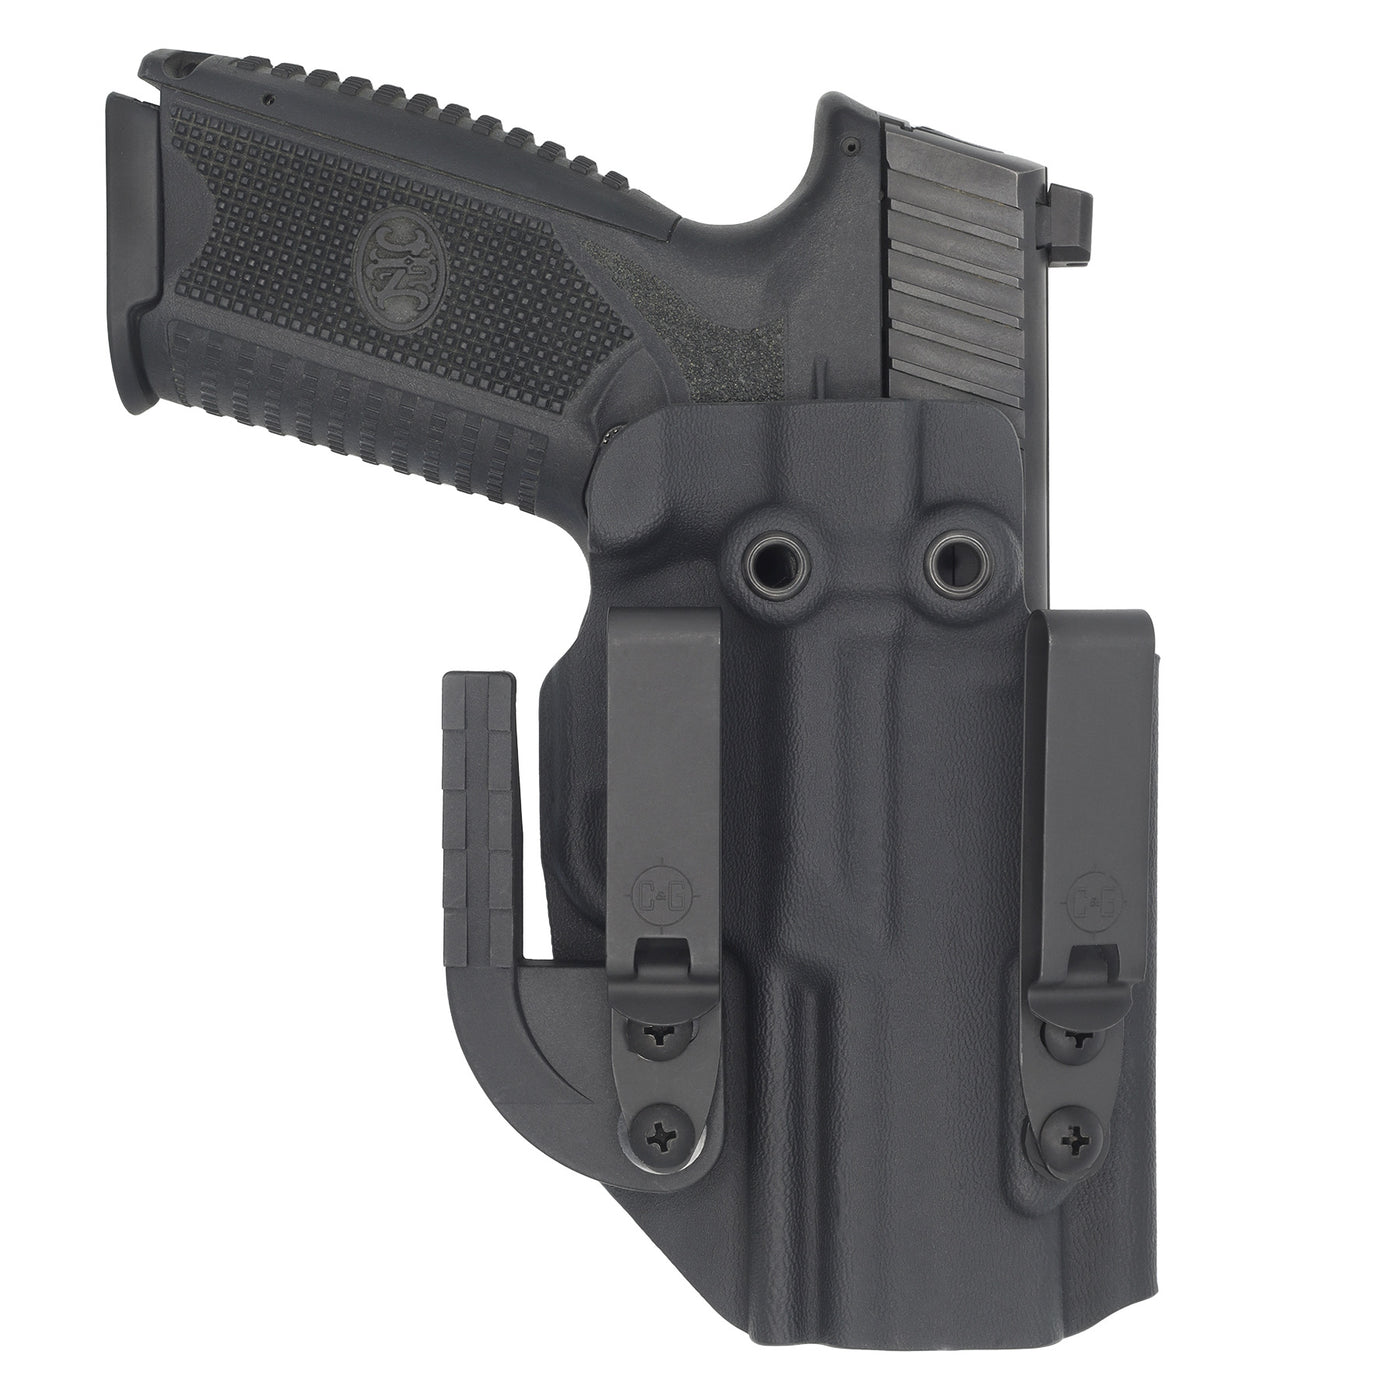 C&G Holsters IWB Alpha Holster for the FN FN509.